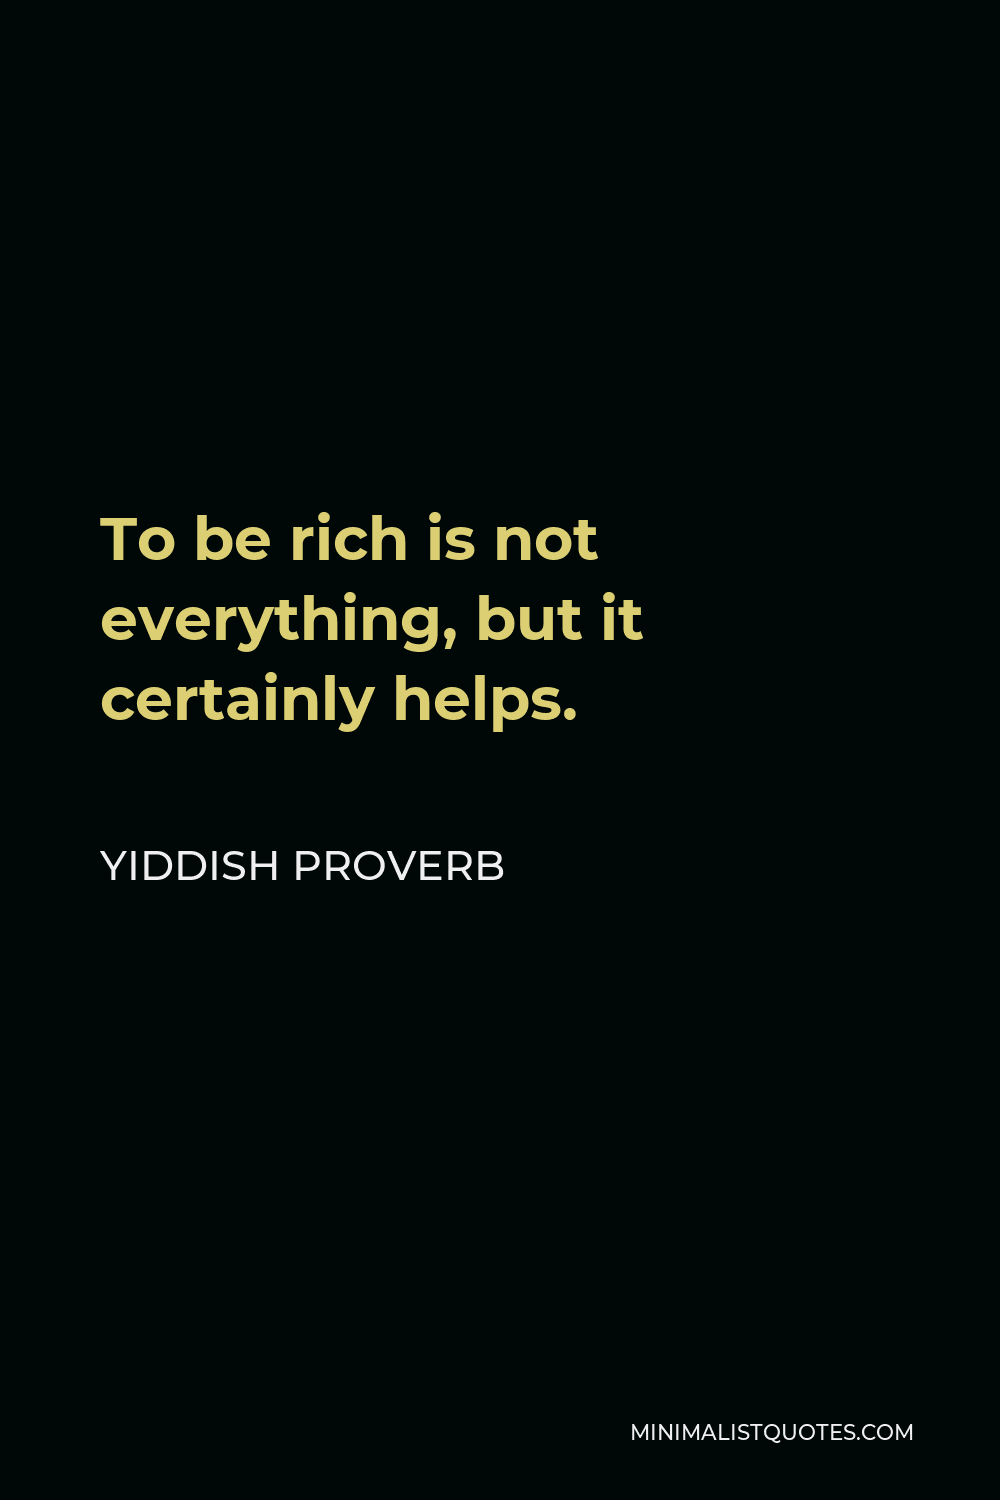 Yiddish Proverb Quote - To be rich is not everything, but it certainly helps.